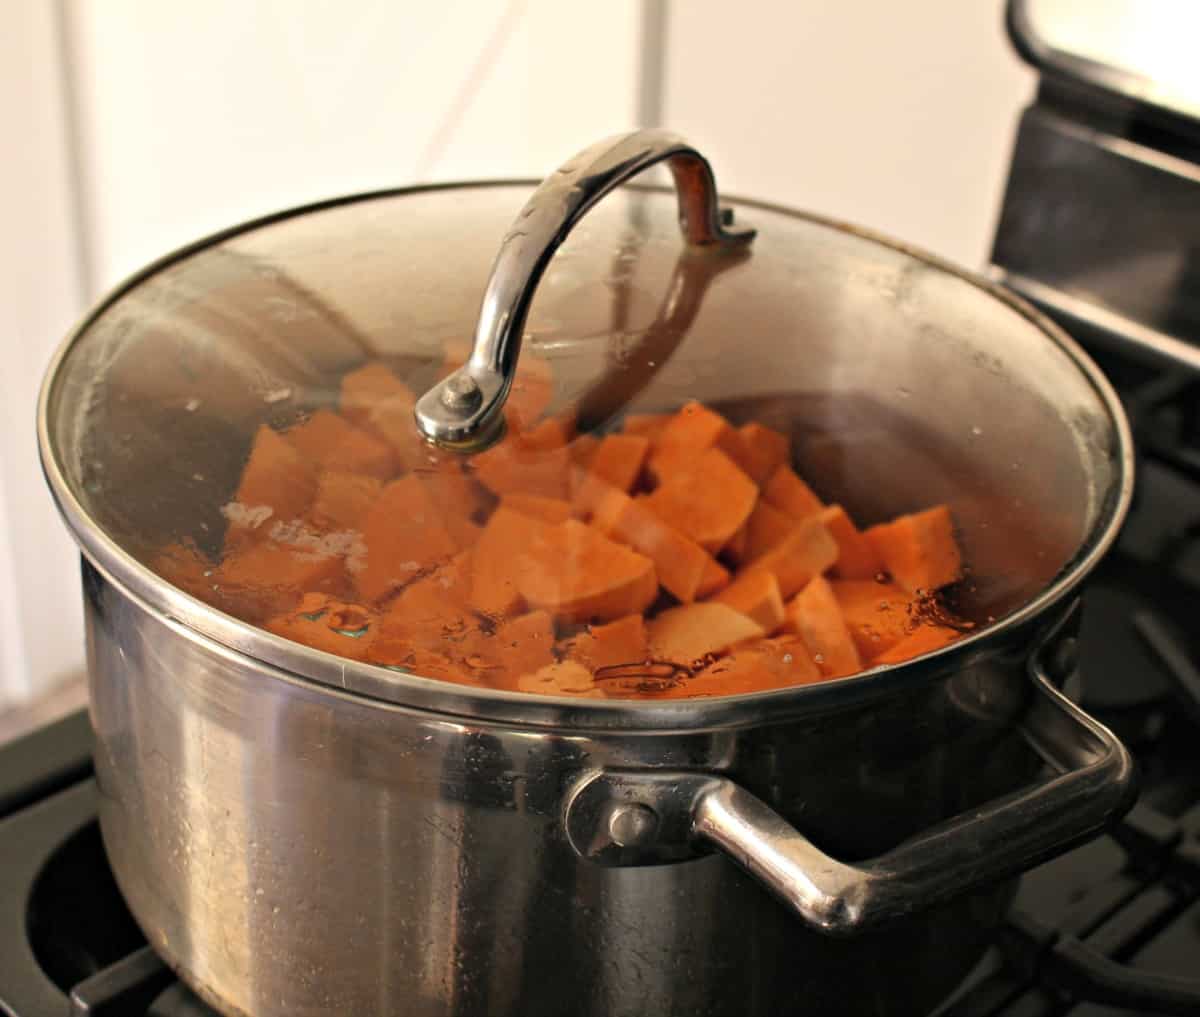 A pot cooking on the stove filled with sweet potatoes.